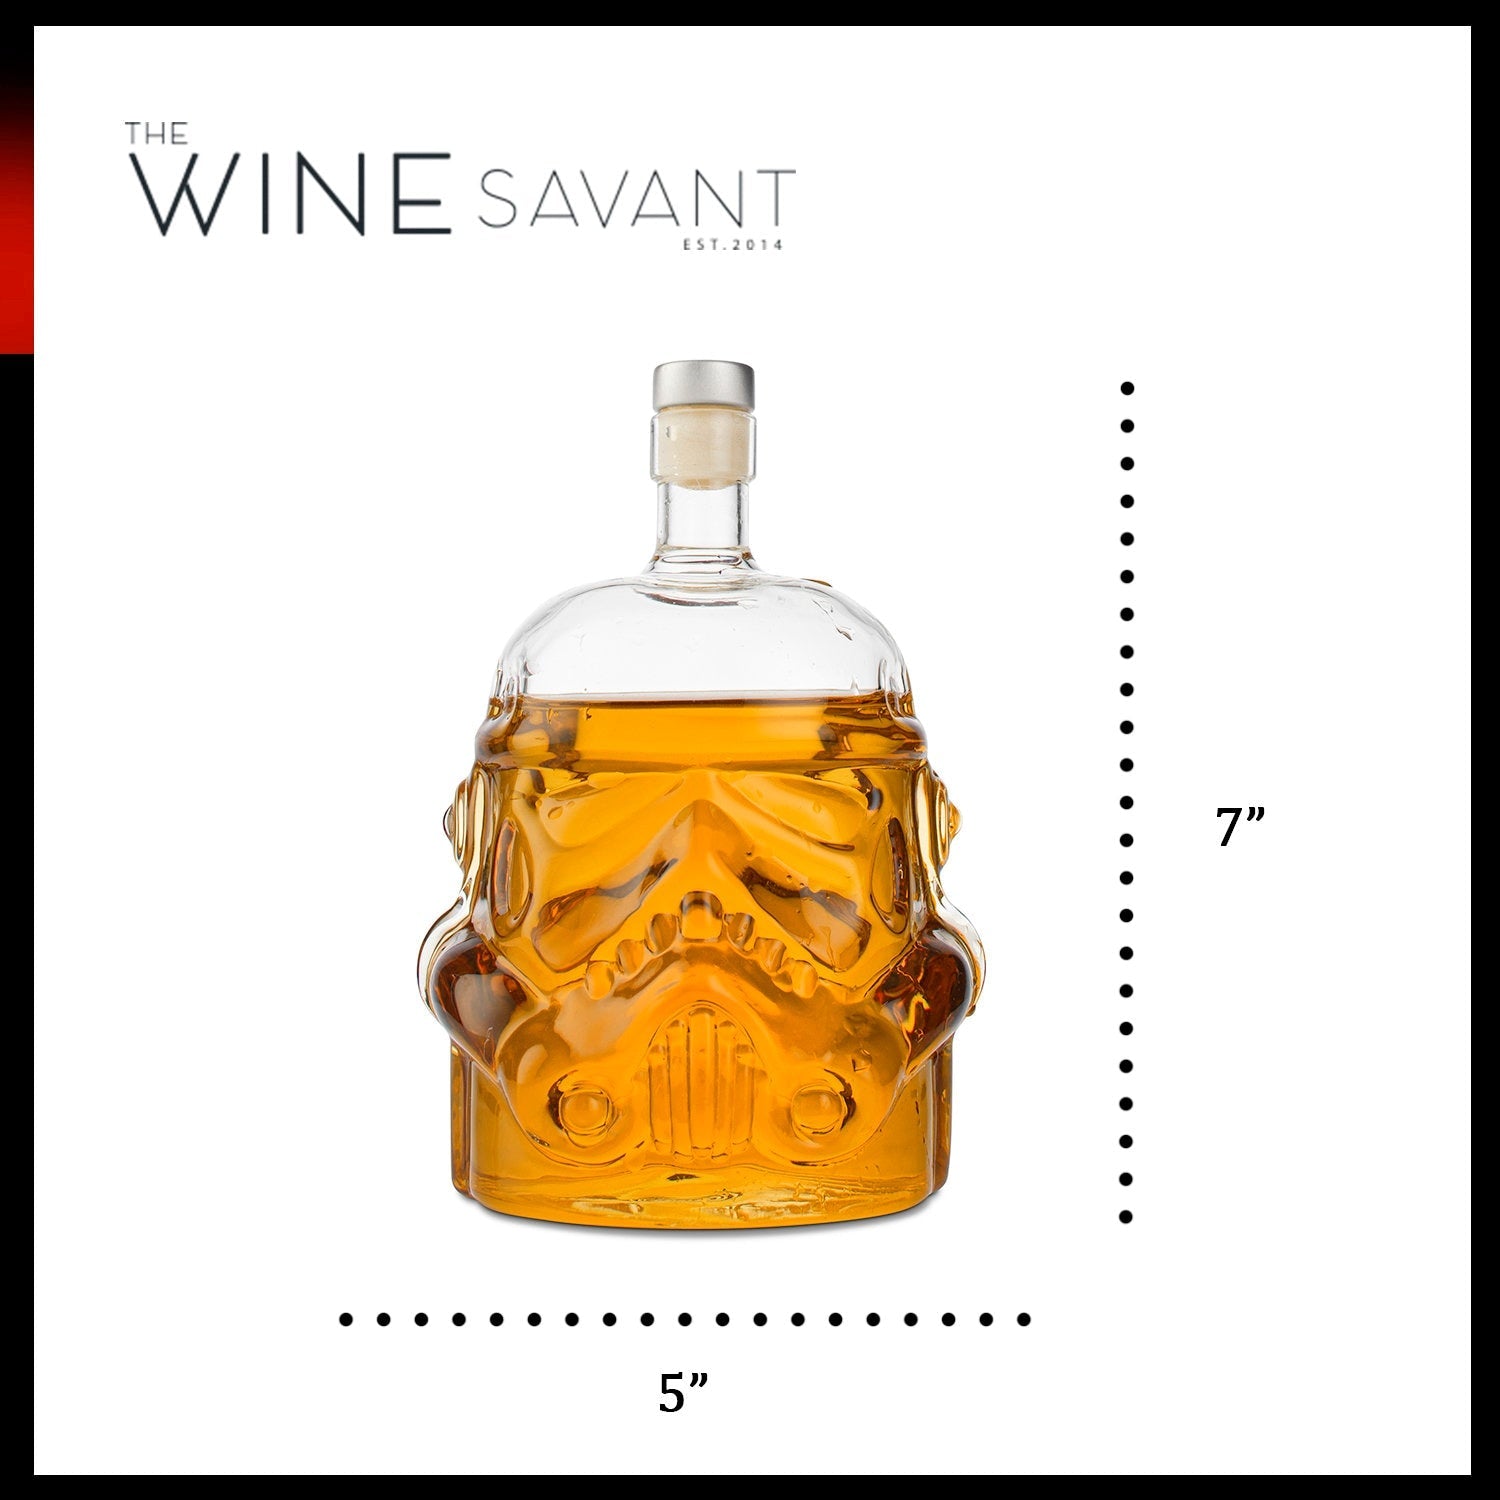 Best Booze for Sci-Fi Fans: Star Wars Wine, GoT Whiskey and More